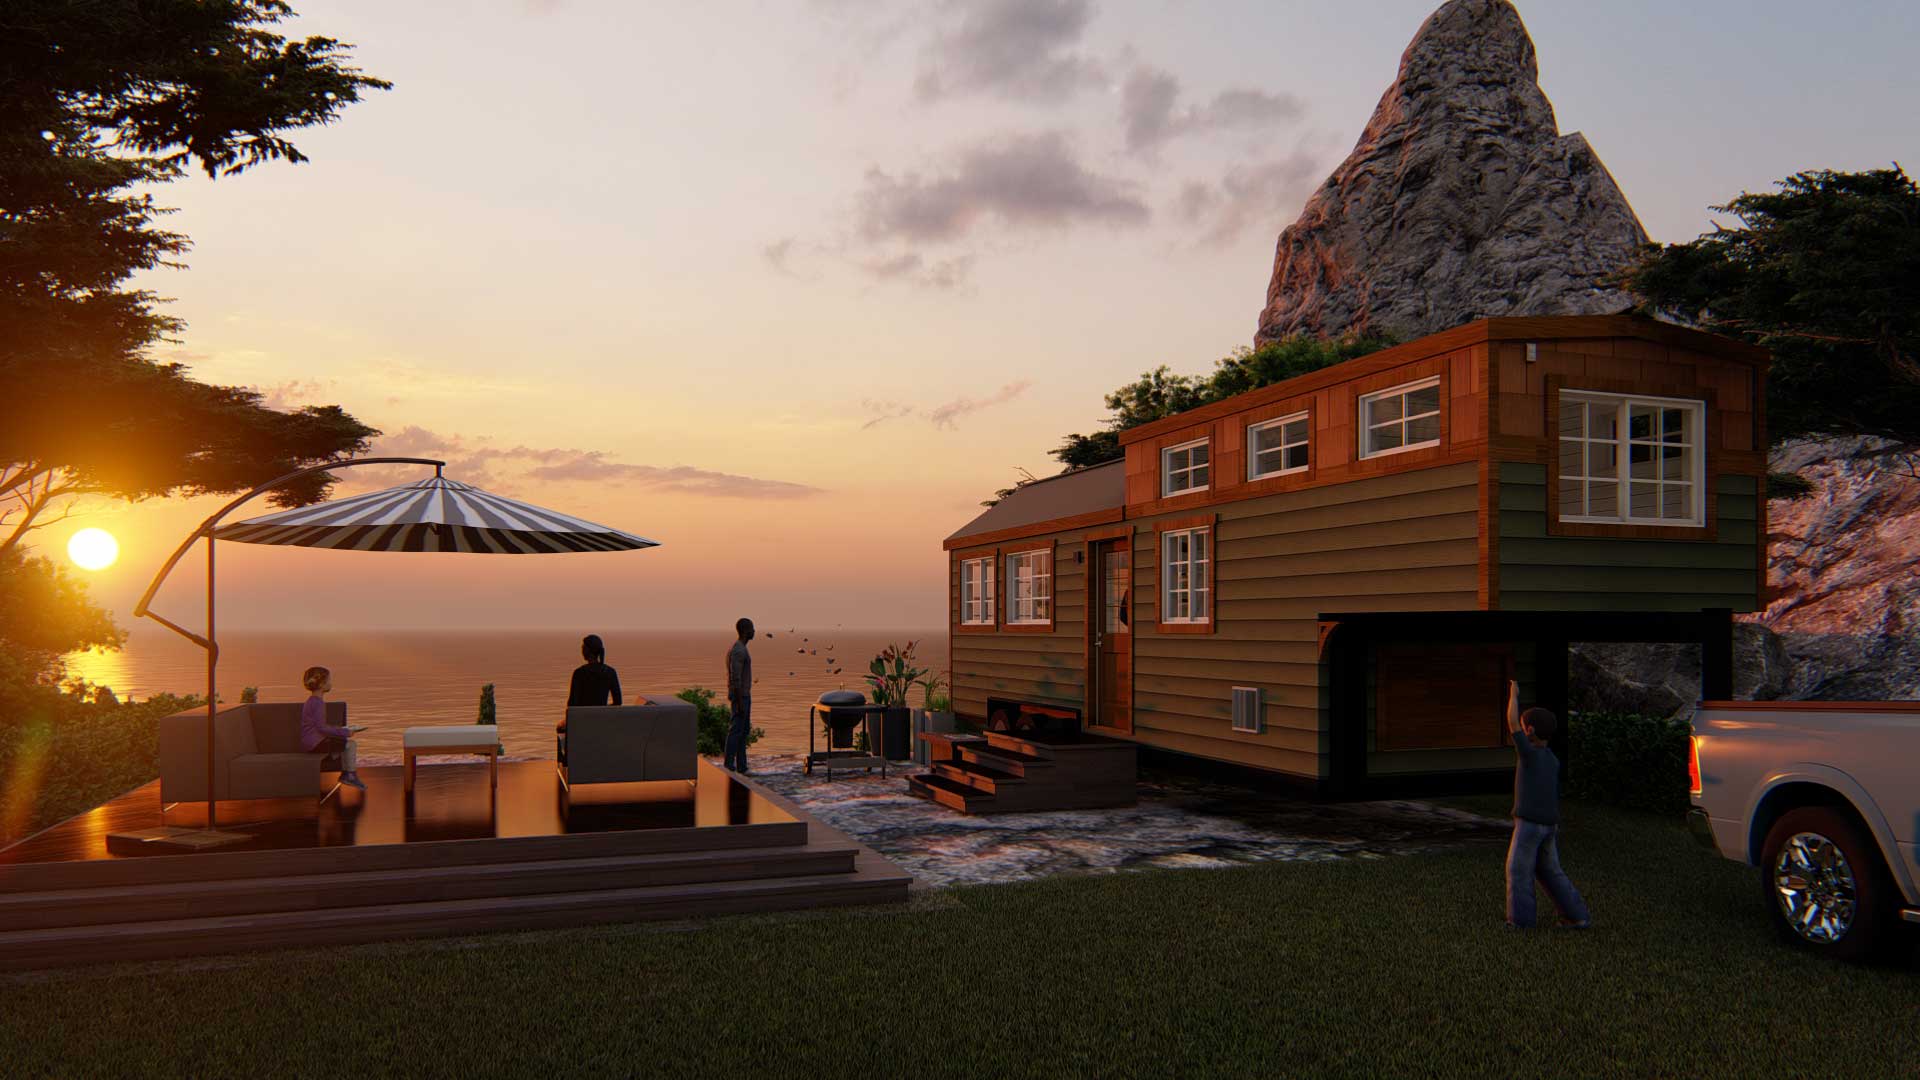 3D model of a craftsman tiny home Majesty model by the ocean